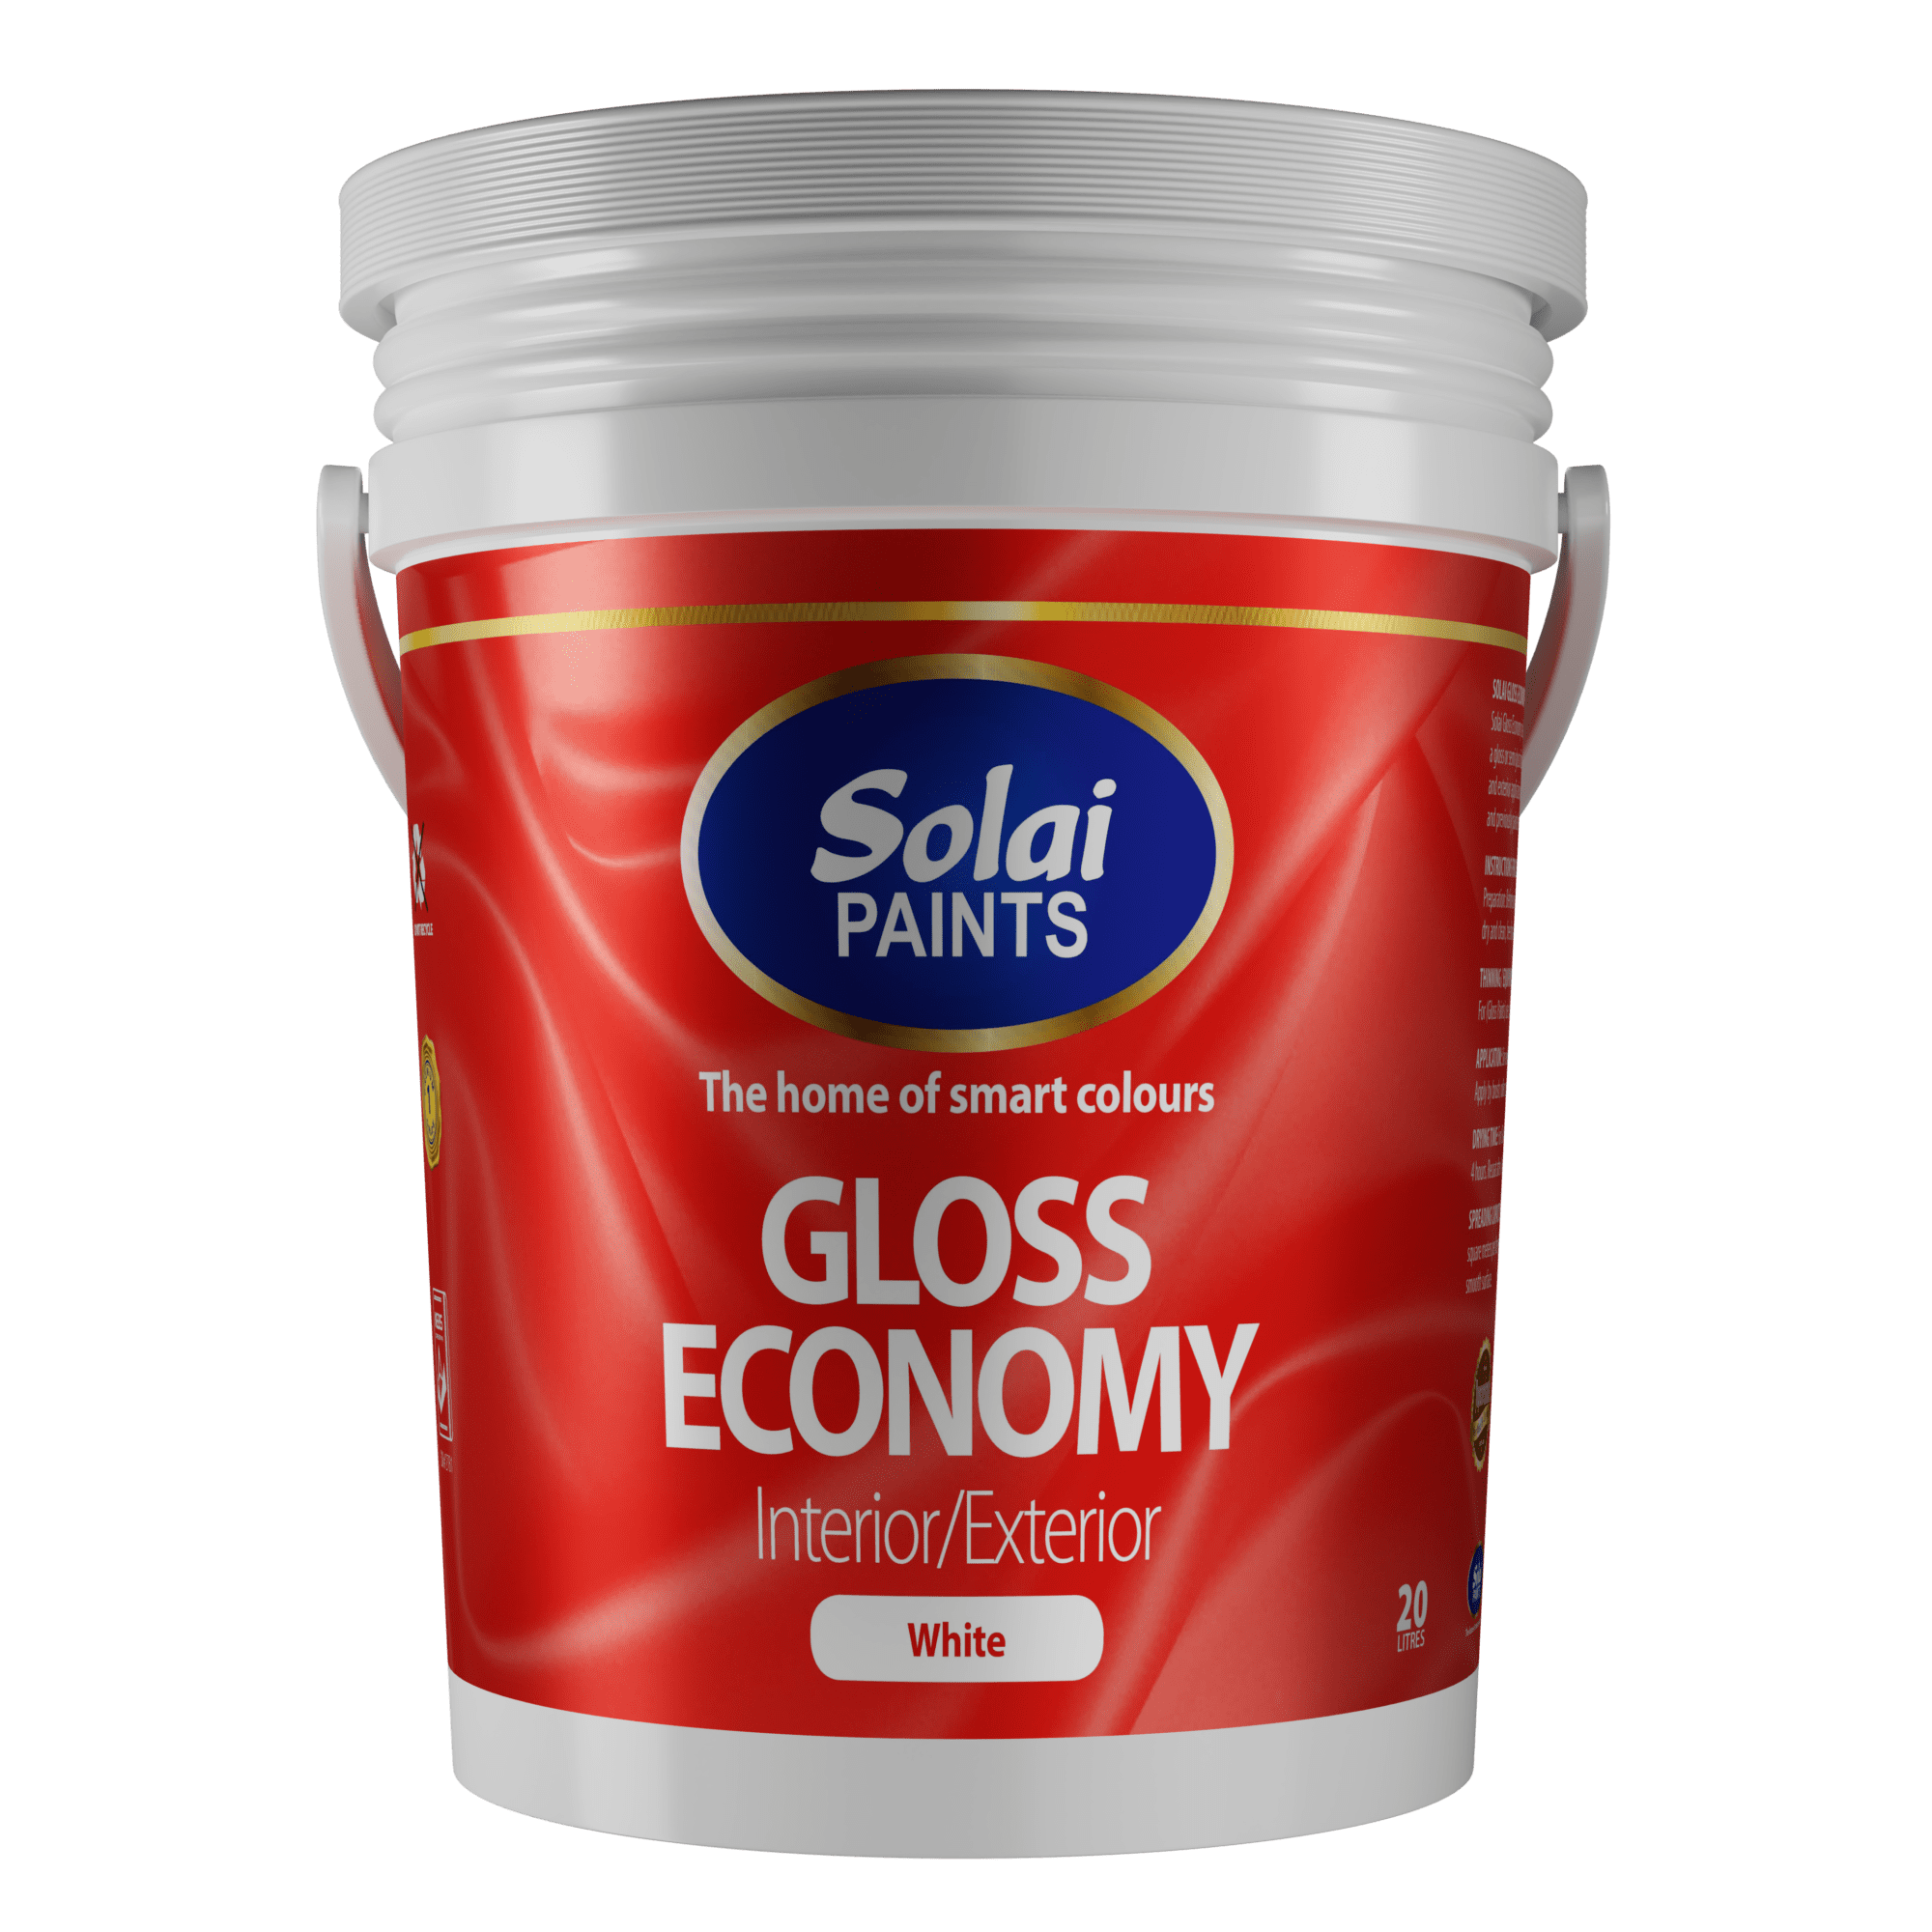 Economy Gloss, Most affordable Gloss Paint in Kenya, Shiny Paint, Lead Free Paint.